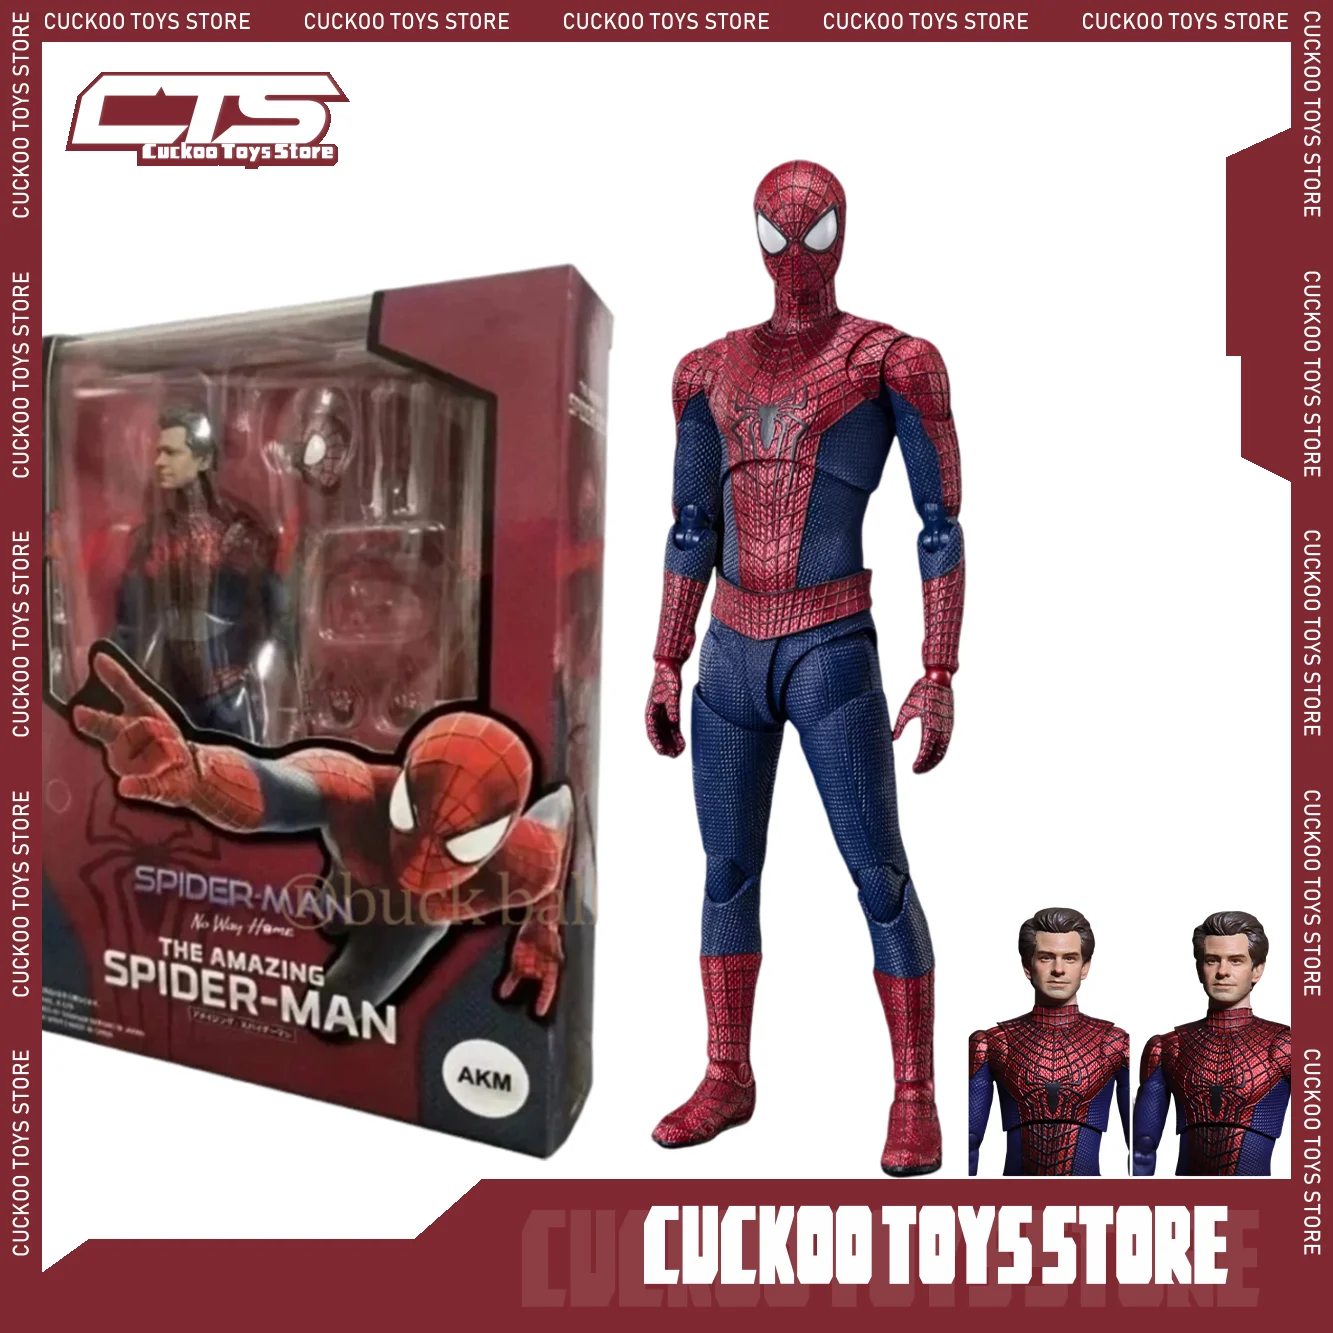 

Shf Spiderman Garfield Figurine The Amazing Spider-Man 2 Action Figure No Way Home Anime Ko Model Arkham Collection Doll Gift